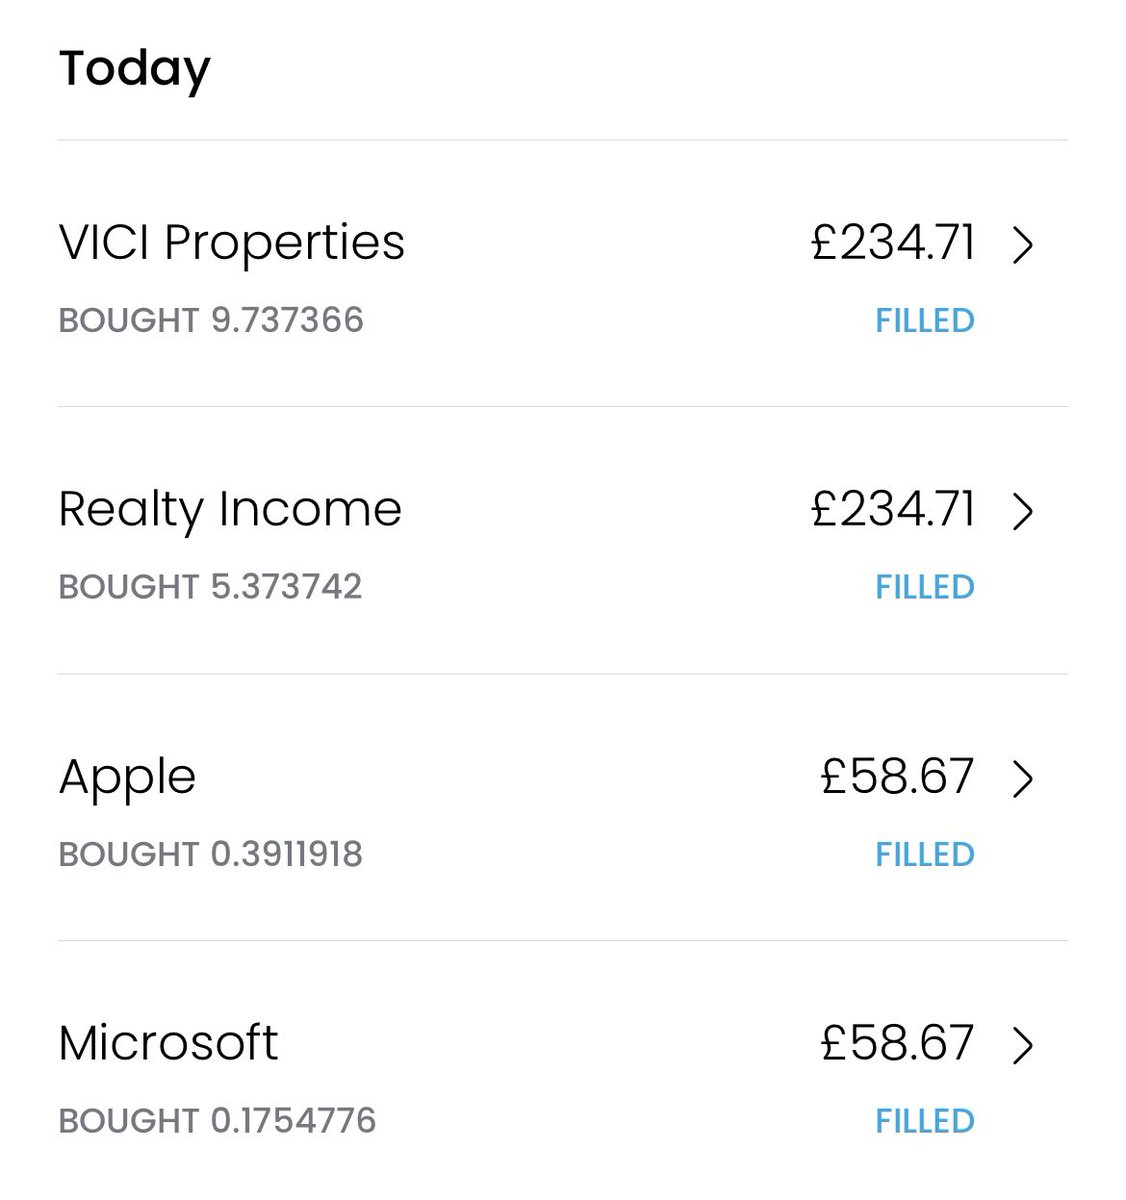 Just invested another additional £500+ into my ISA 

$O - £234.71
$VICI - £234.71
$AAPL - £58.67
$MSFT - £58.67

Has anyone else made any purchases today? 

#PassiveIncome #FinancialFreedom #Investing #DividendInvesting